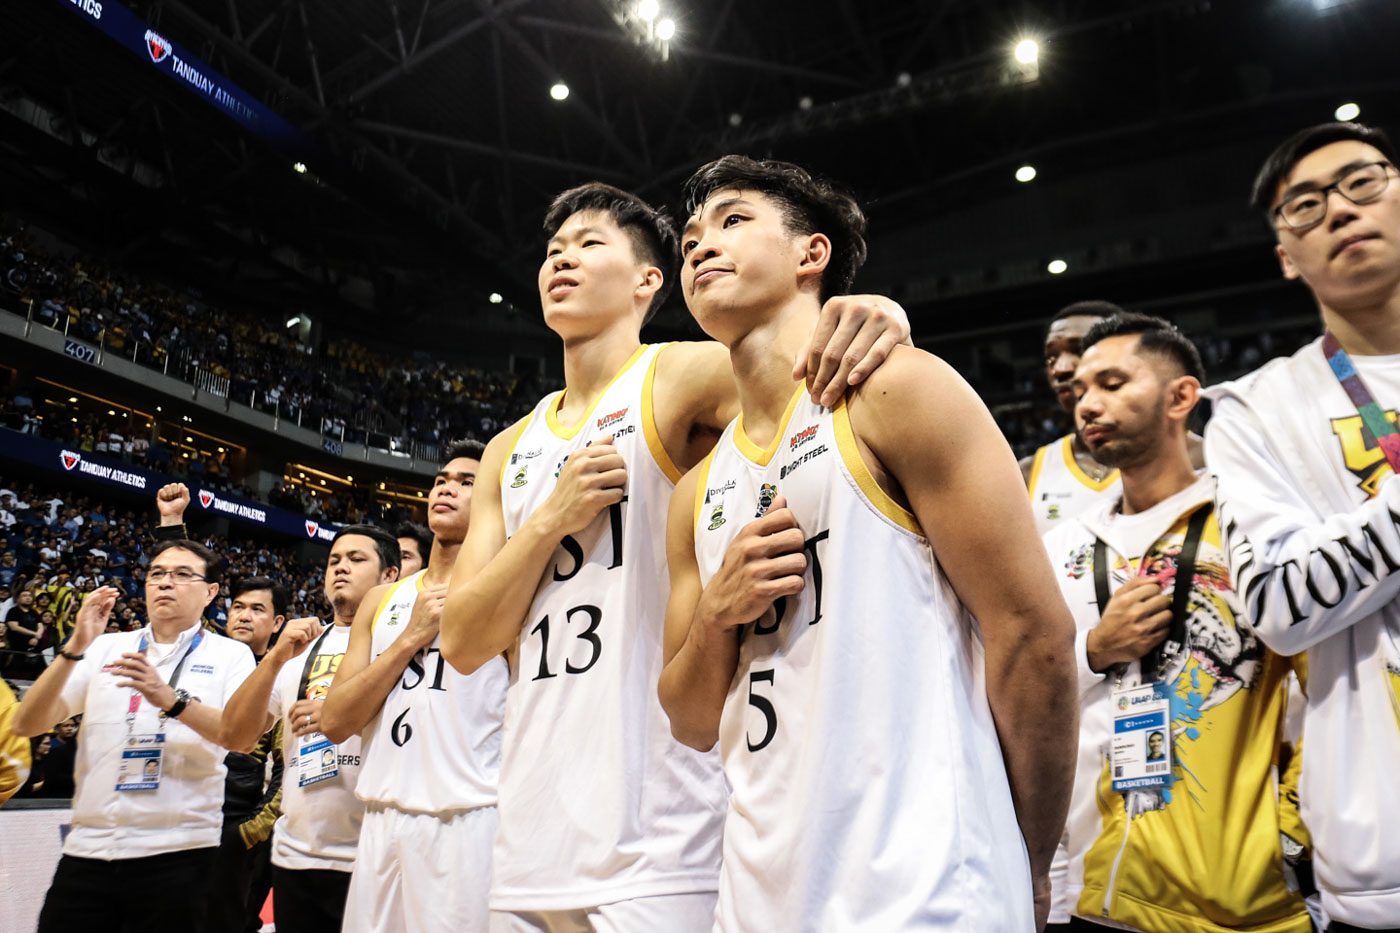 Subido leaves UST in capable hands of Nonoy, Ayo